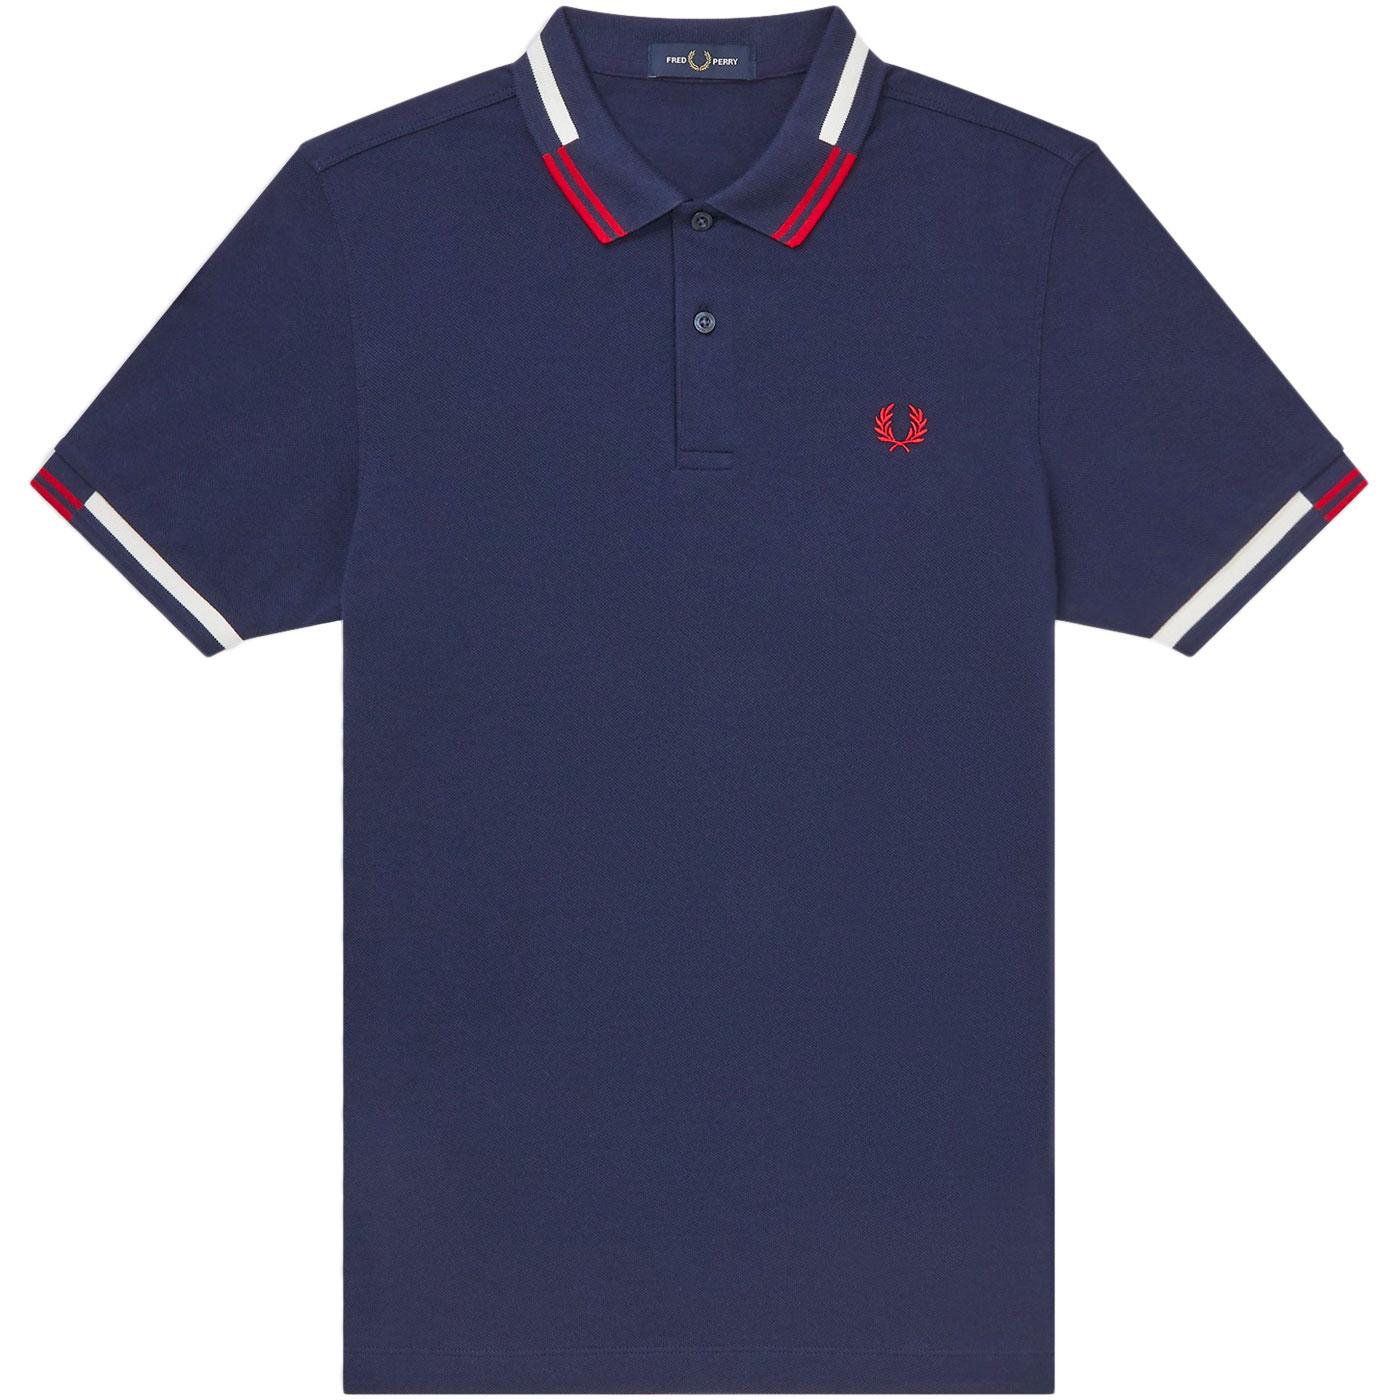 FRED PERRY M8551 Abstract Tipped Polo Shirt (CB)